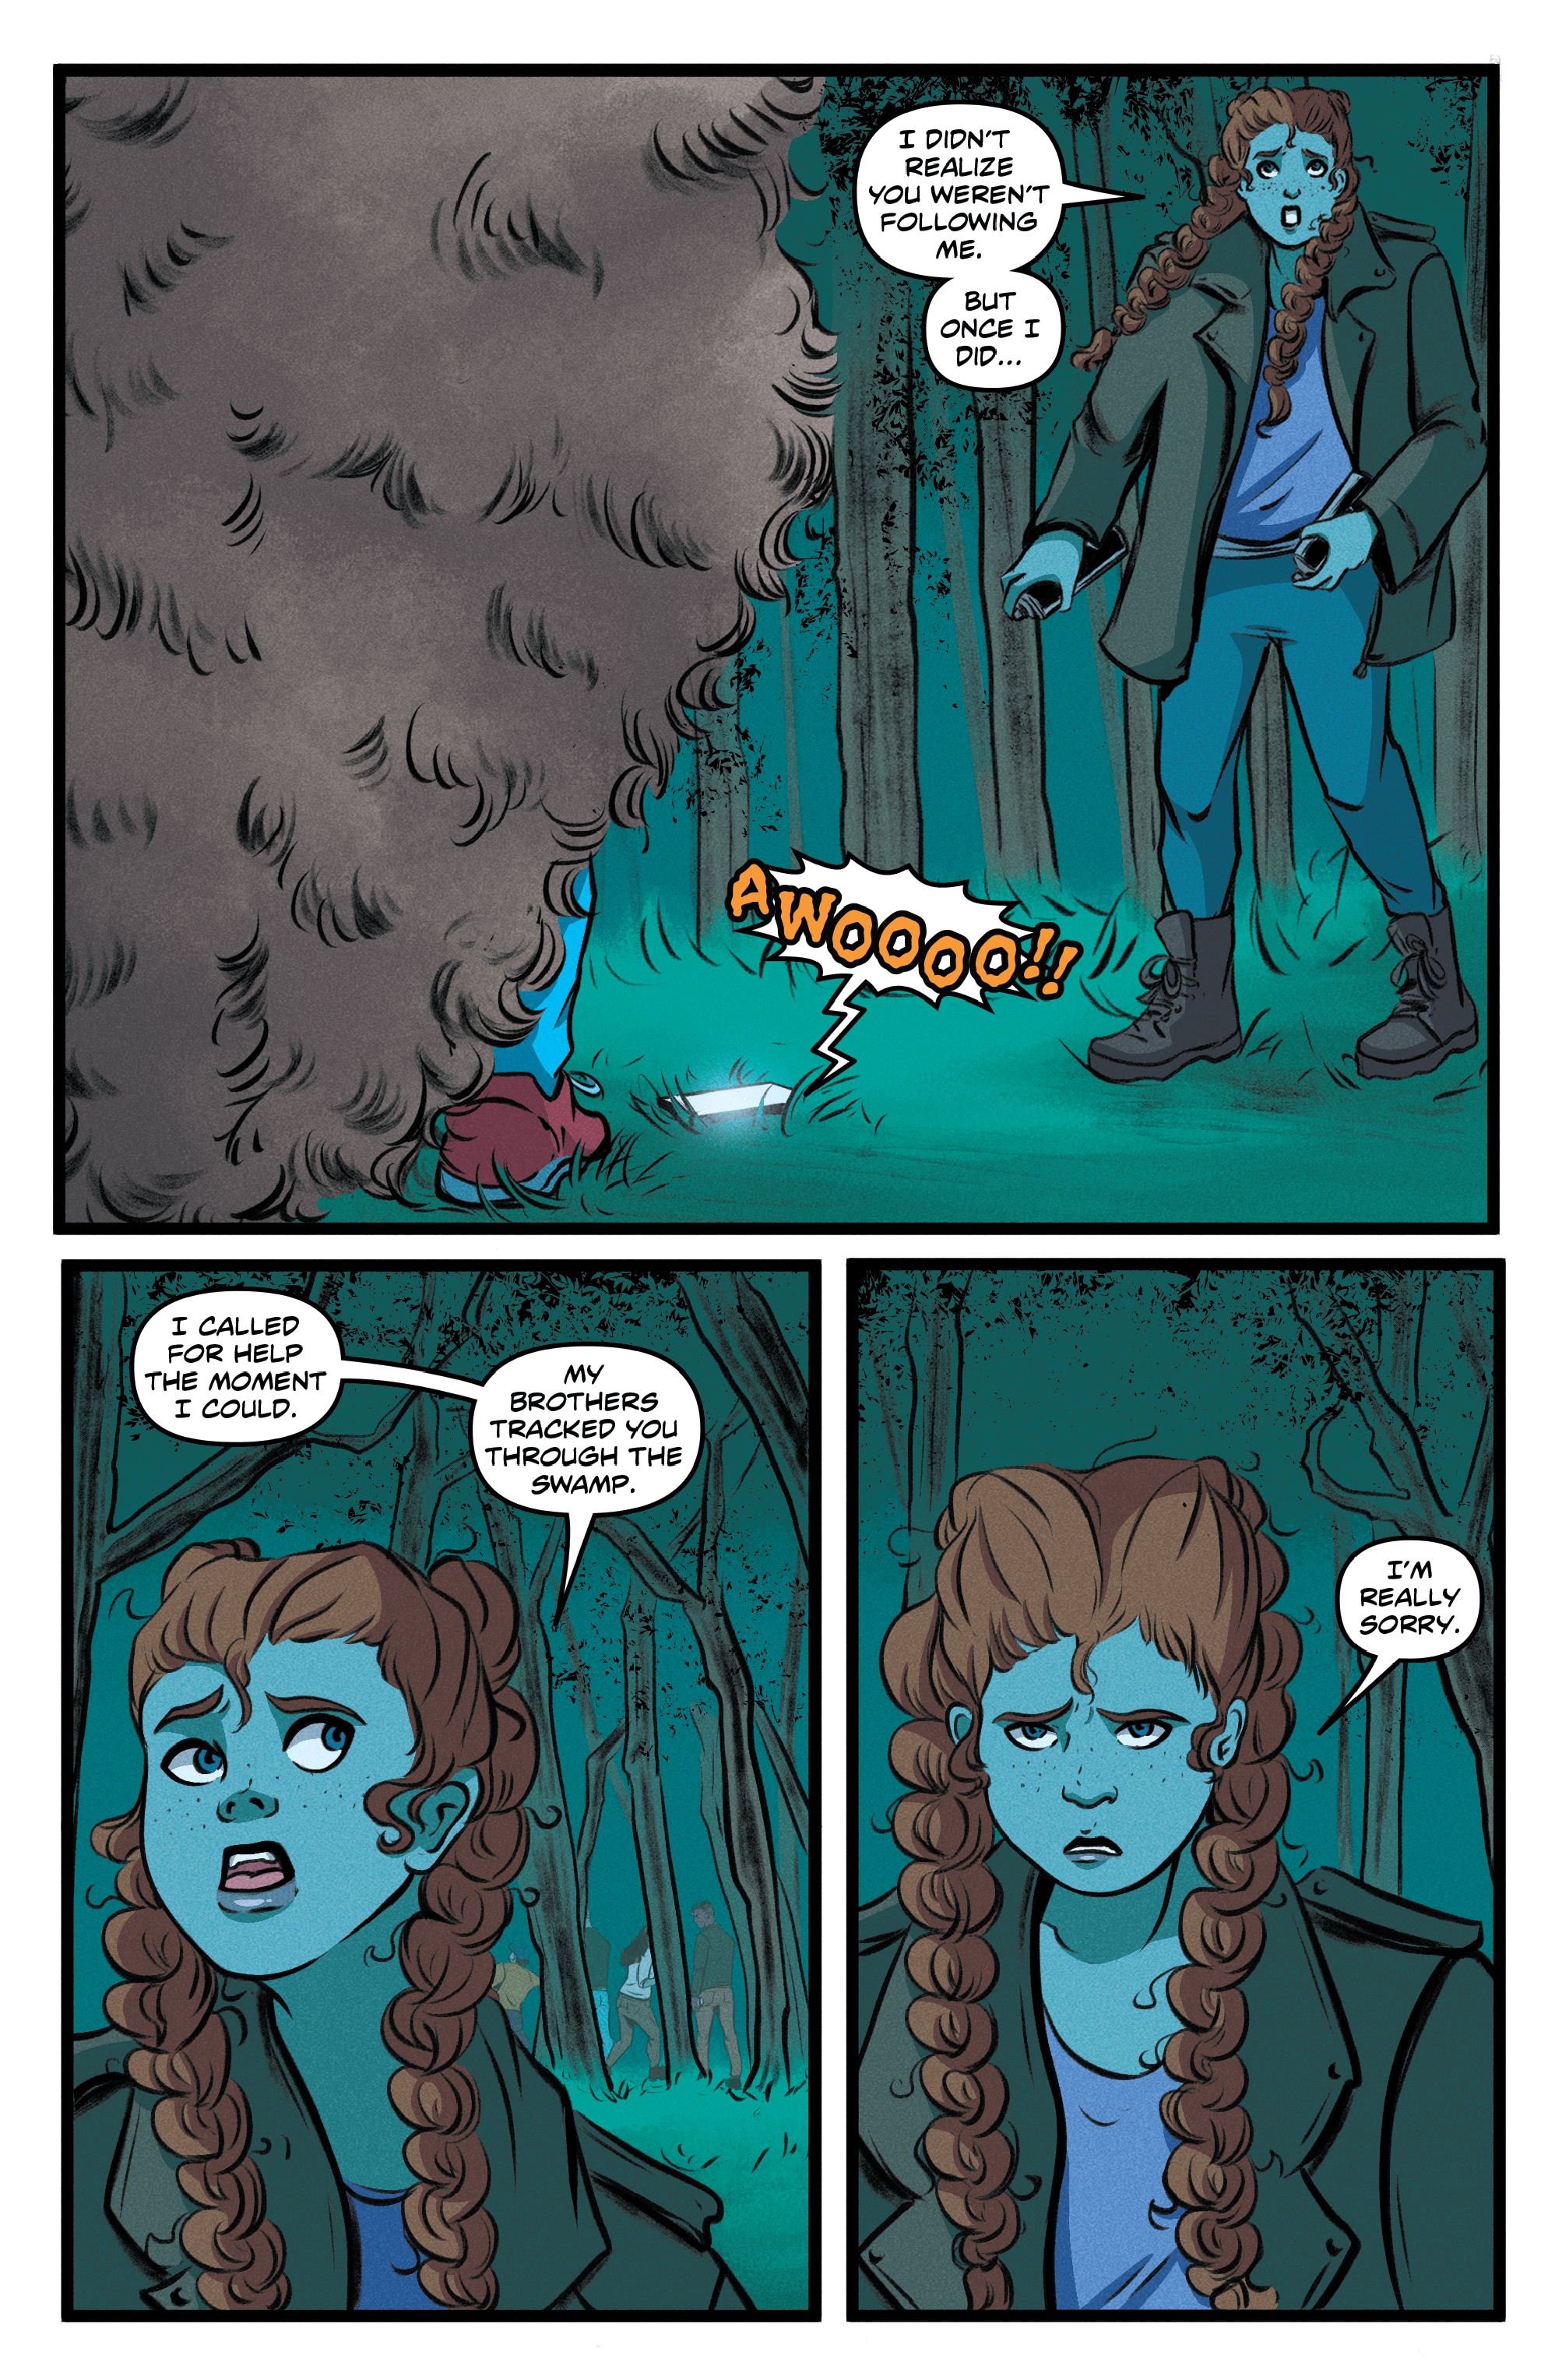 Goosebumps: Secrets of the Swamp (2020-): Chapter 5 - Page 4